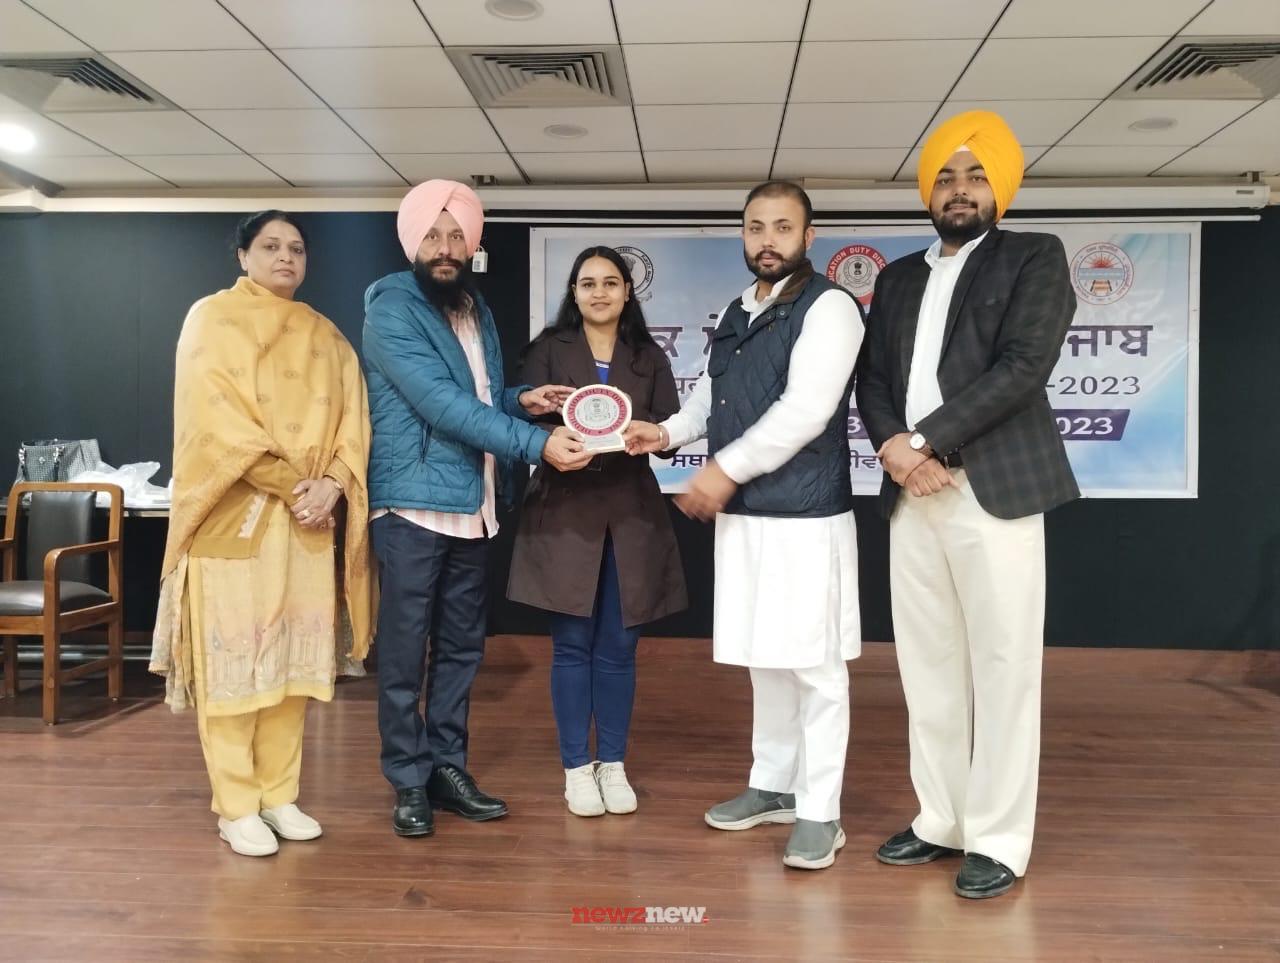 Youth training workshops play an important role in Personality Development of Youth: Parminder Singh Goldy